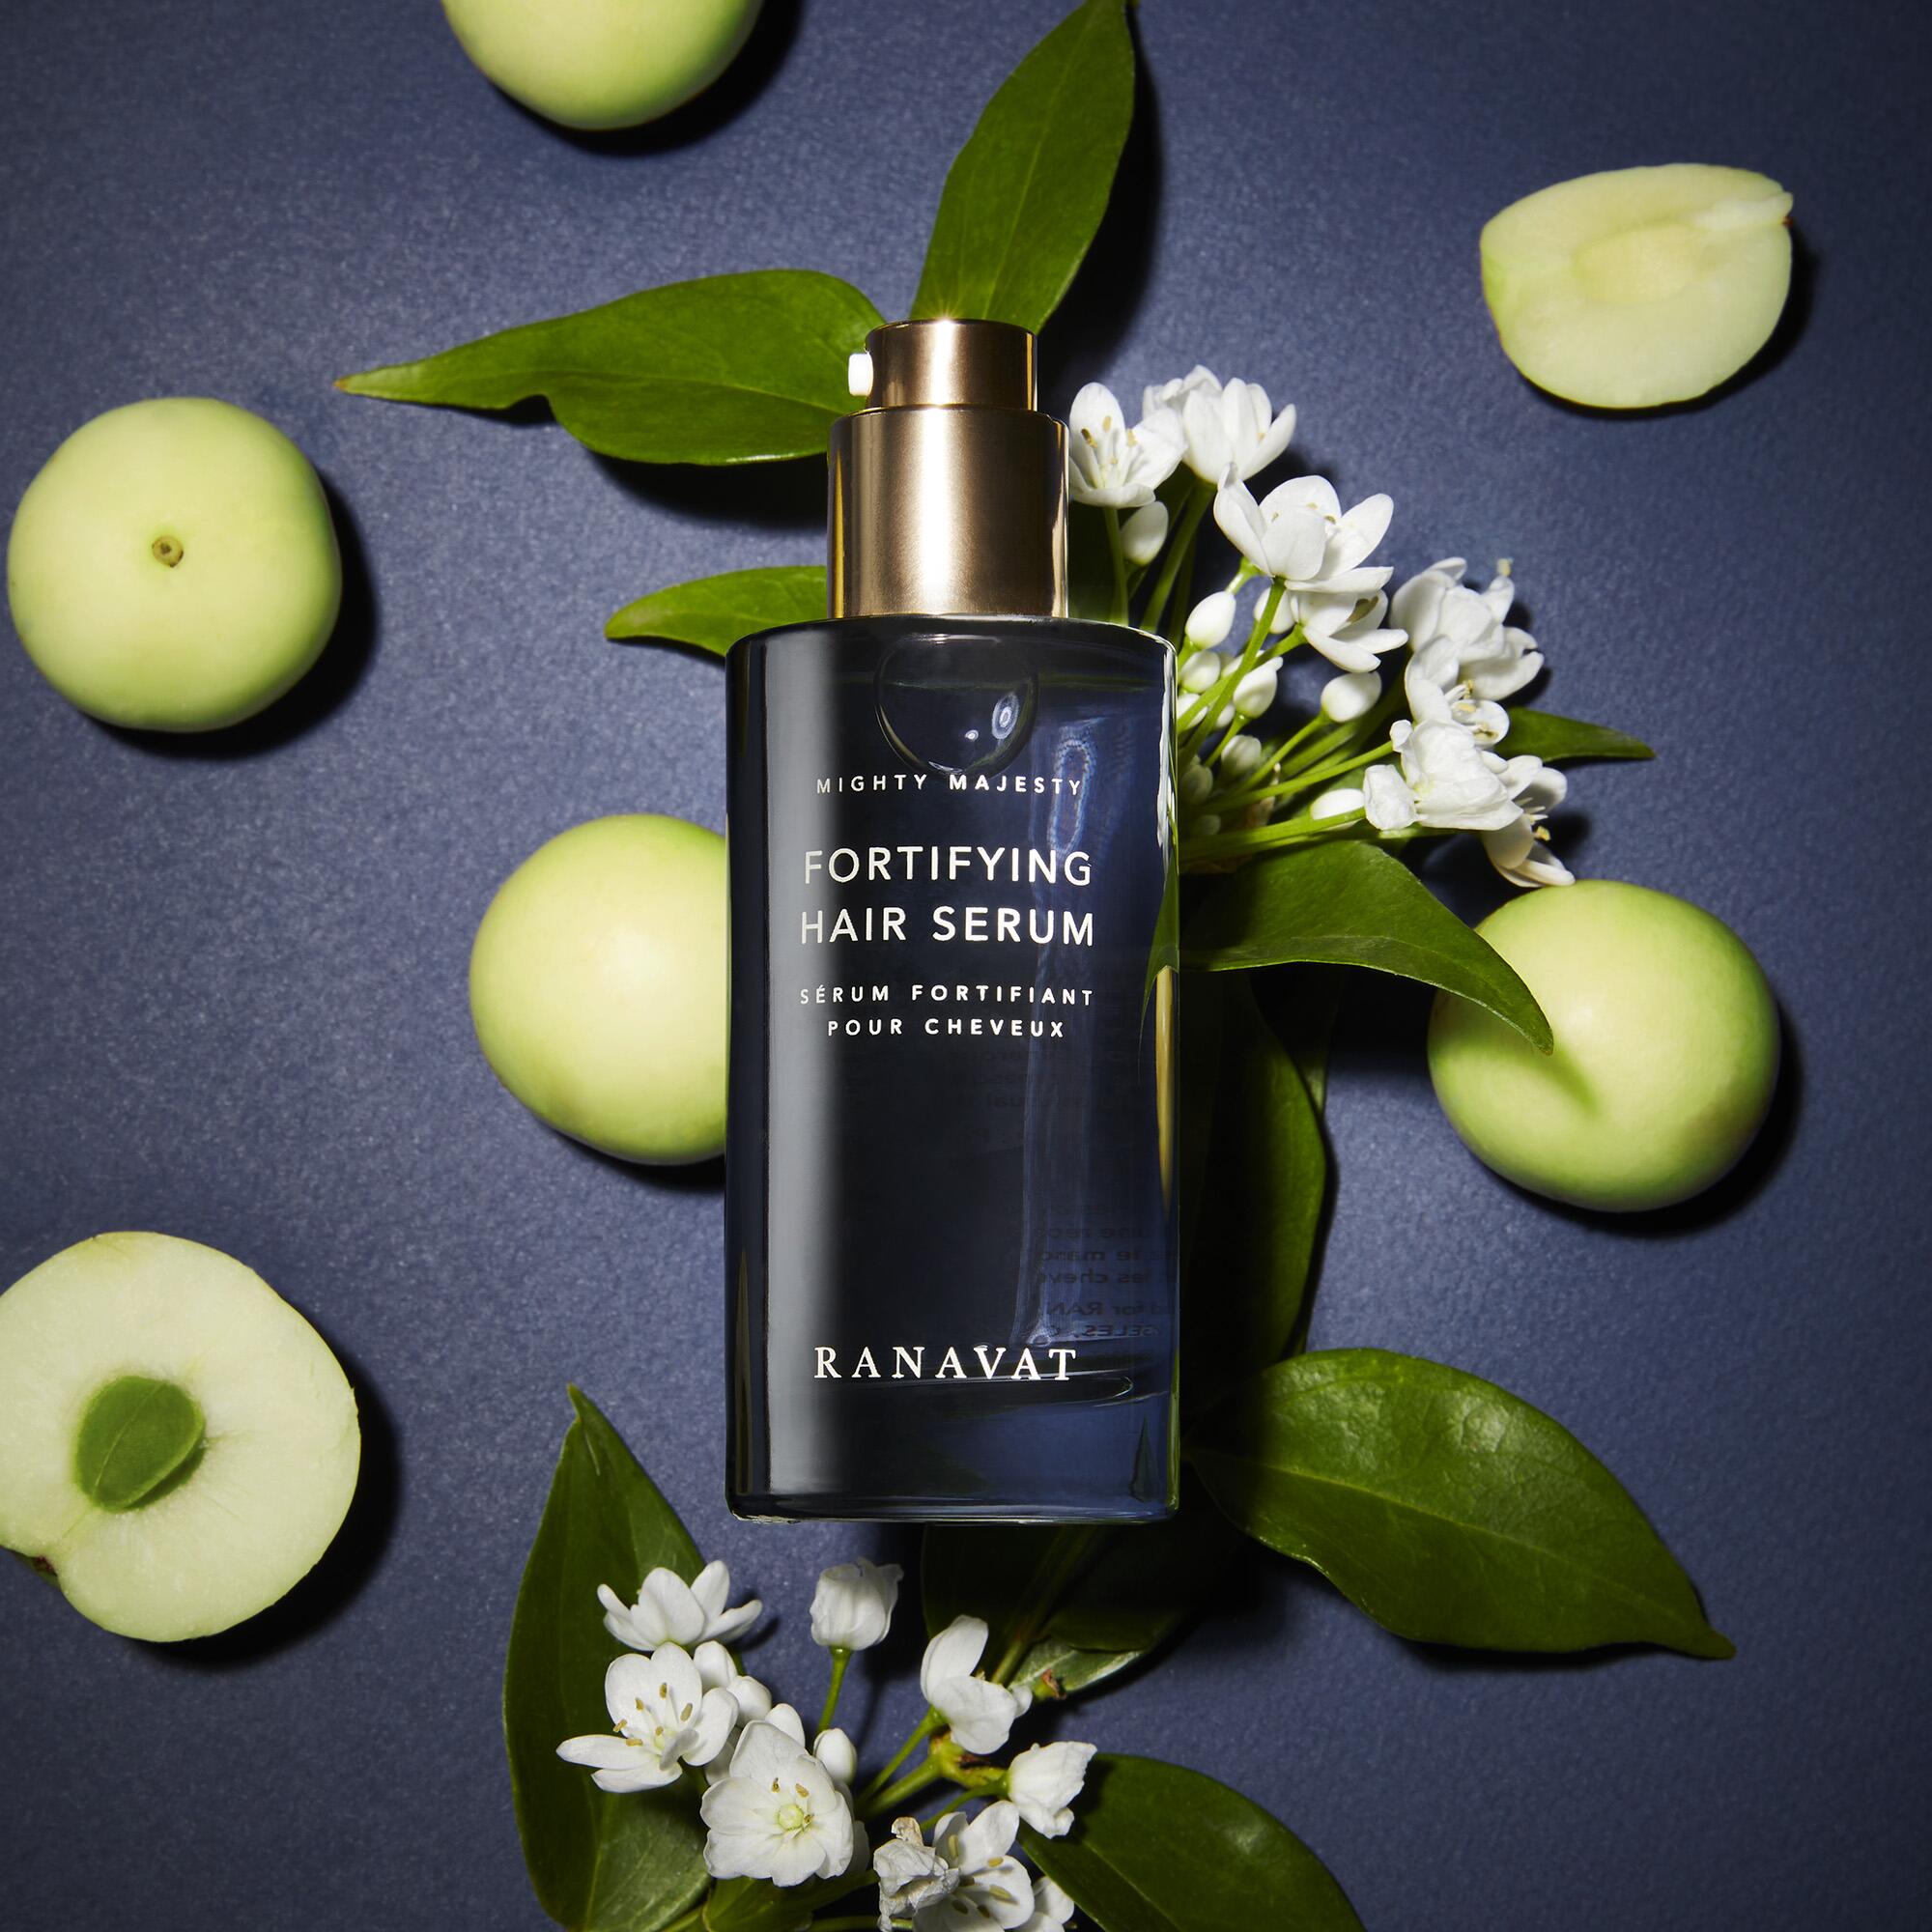 a blue Ranavat hair serum bottle lying on top of small white flowers and leaves, surrounded by green fruit